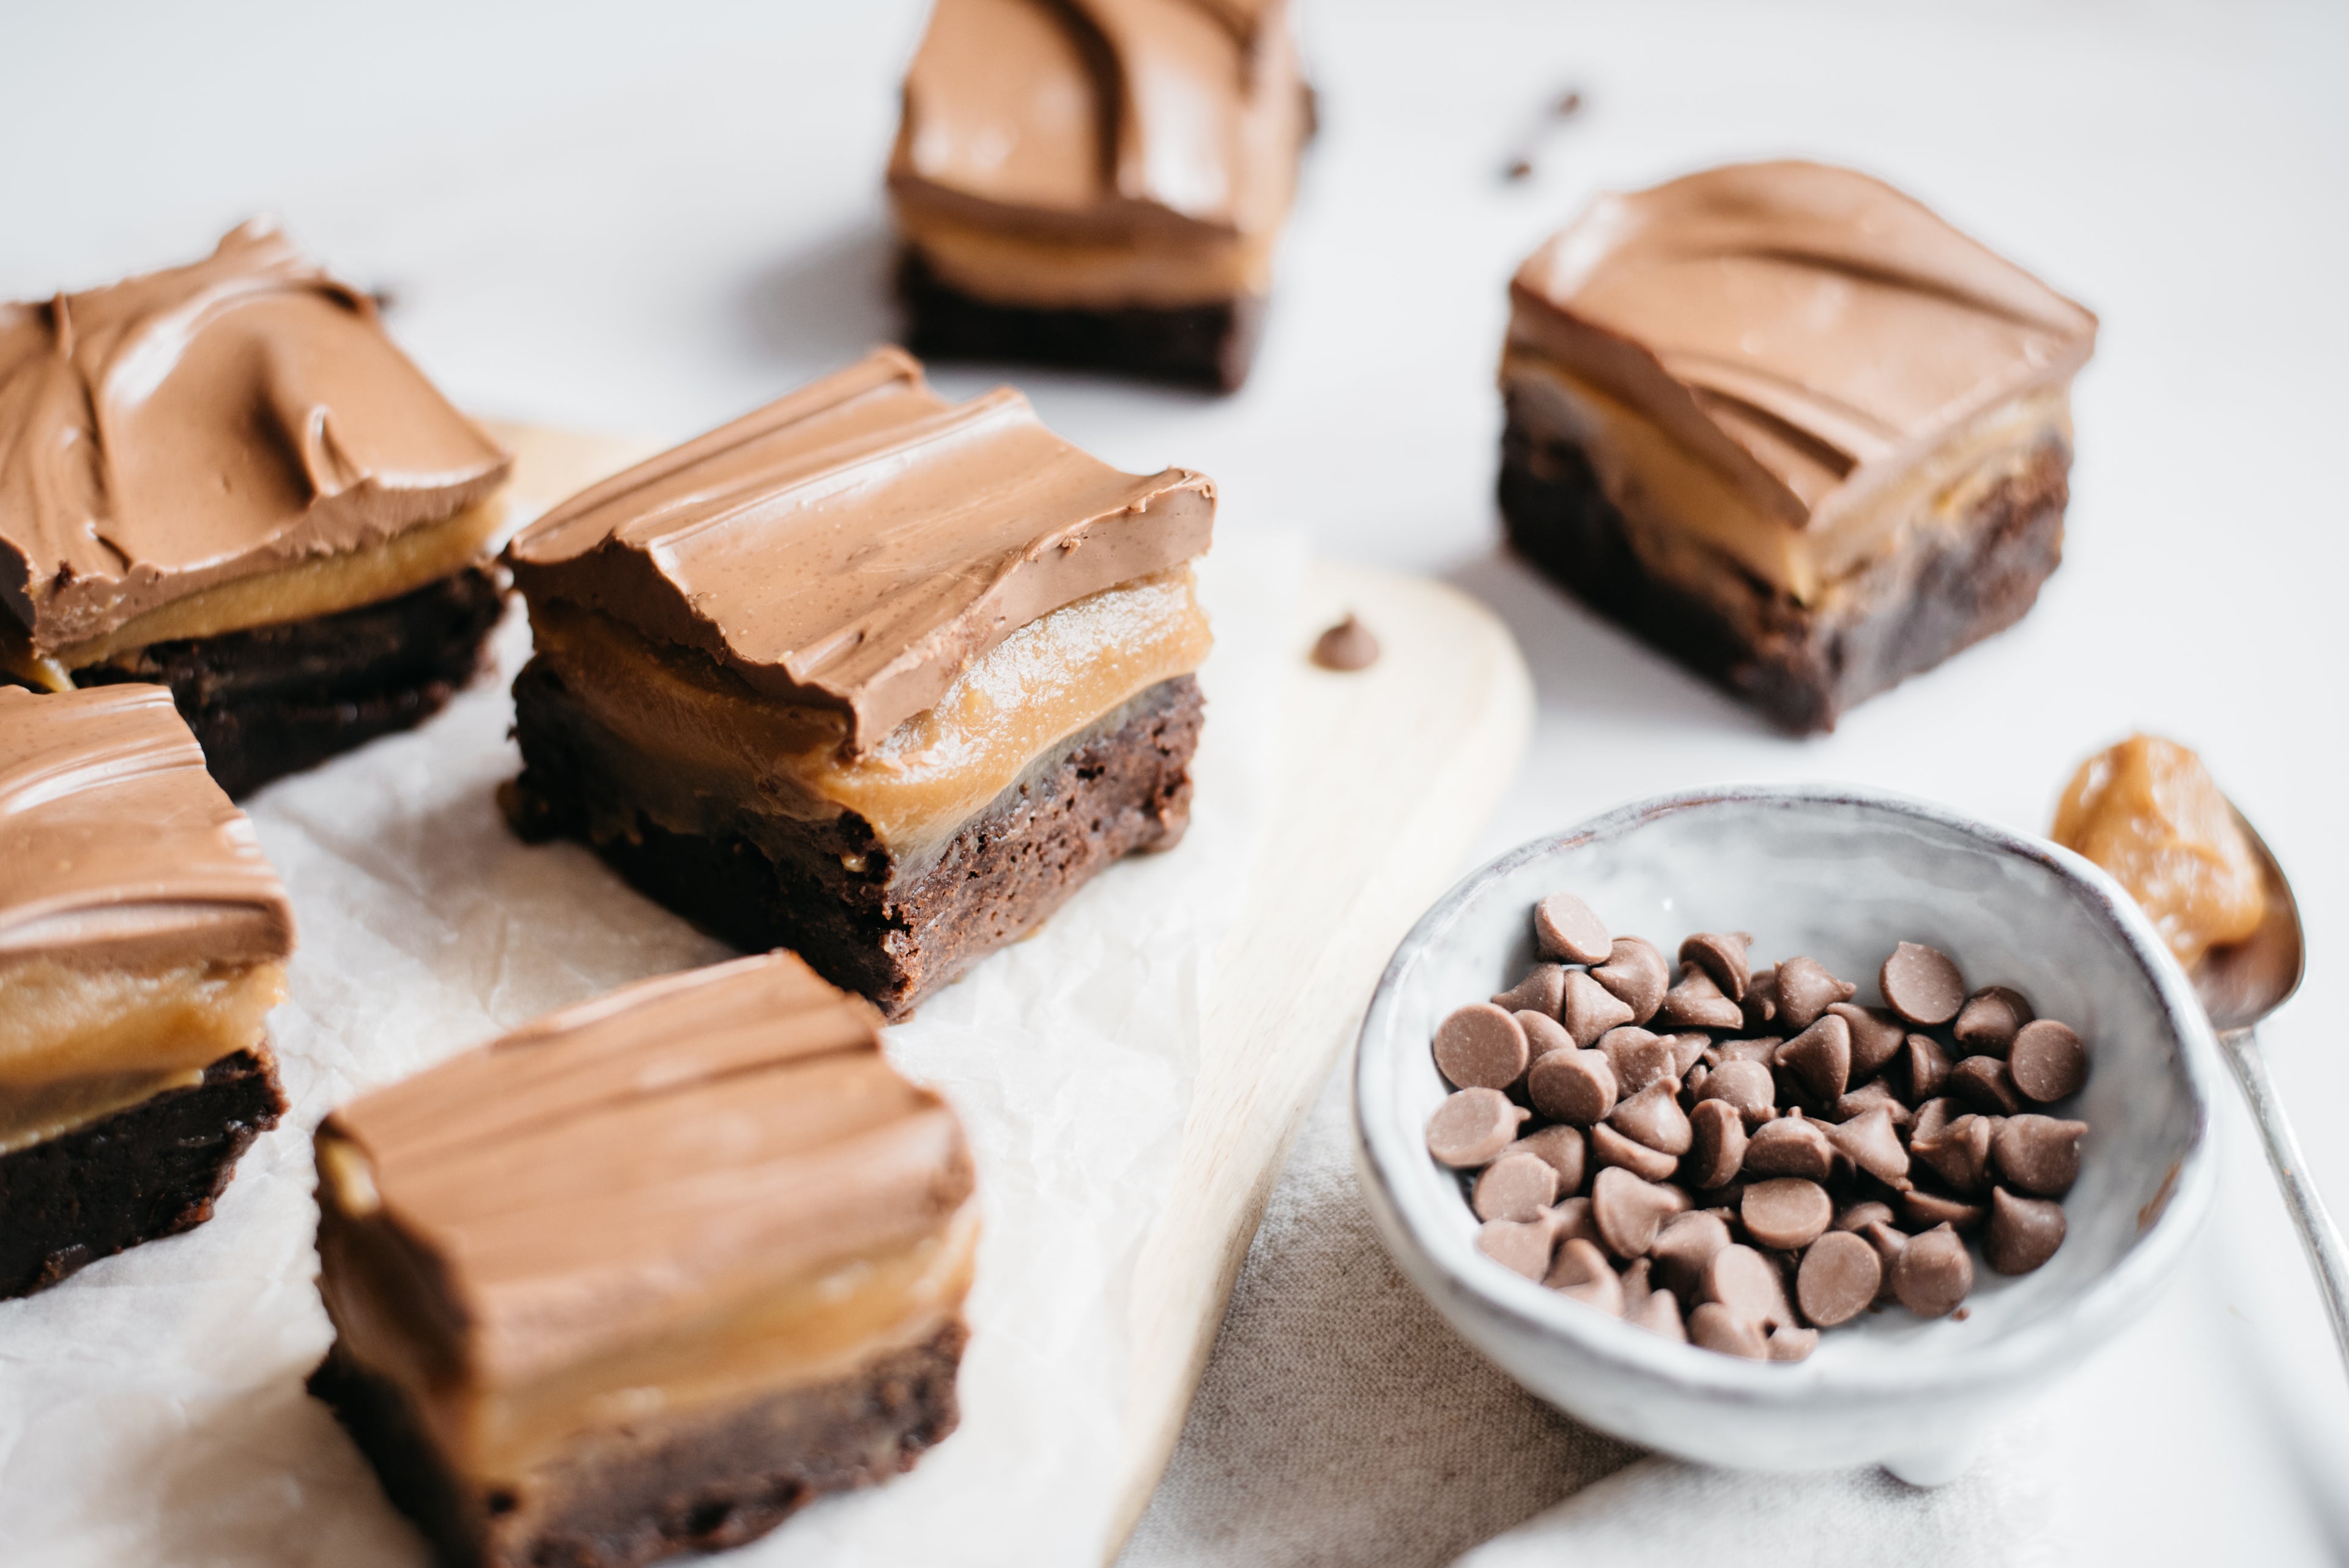 Slices of Brownie Based Millionaires Traybake with a bowl of chocolate chip, and a spoonful of caramel